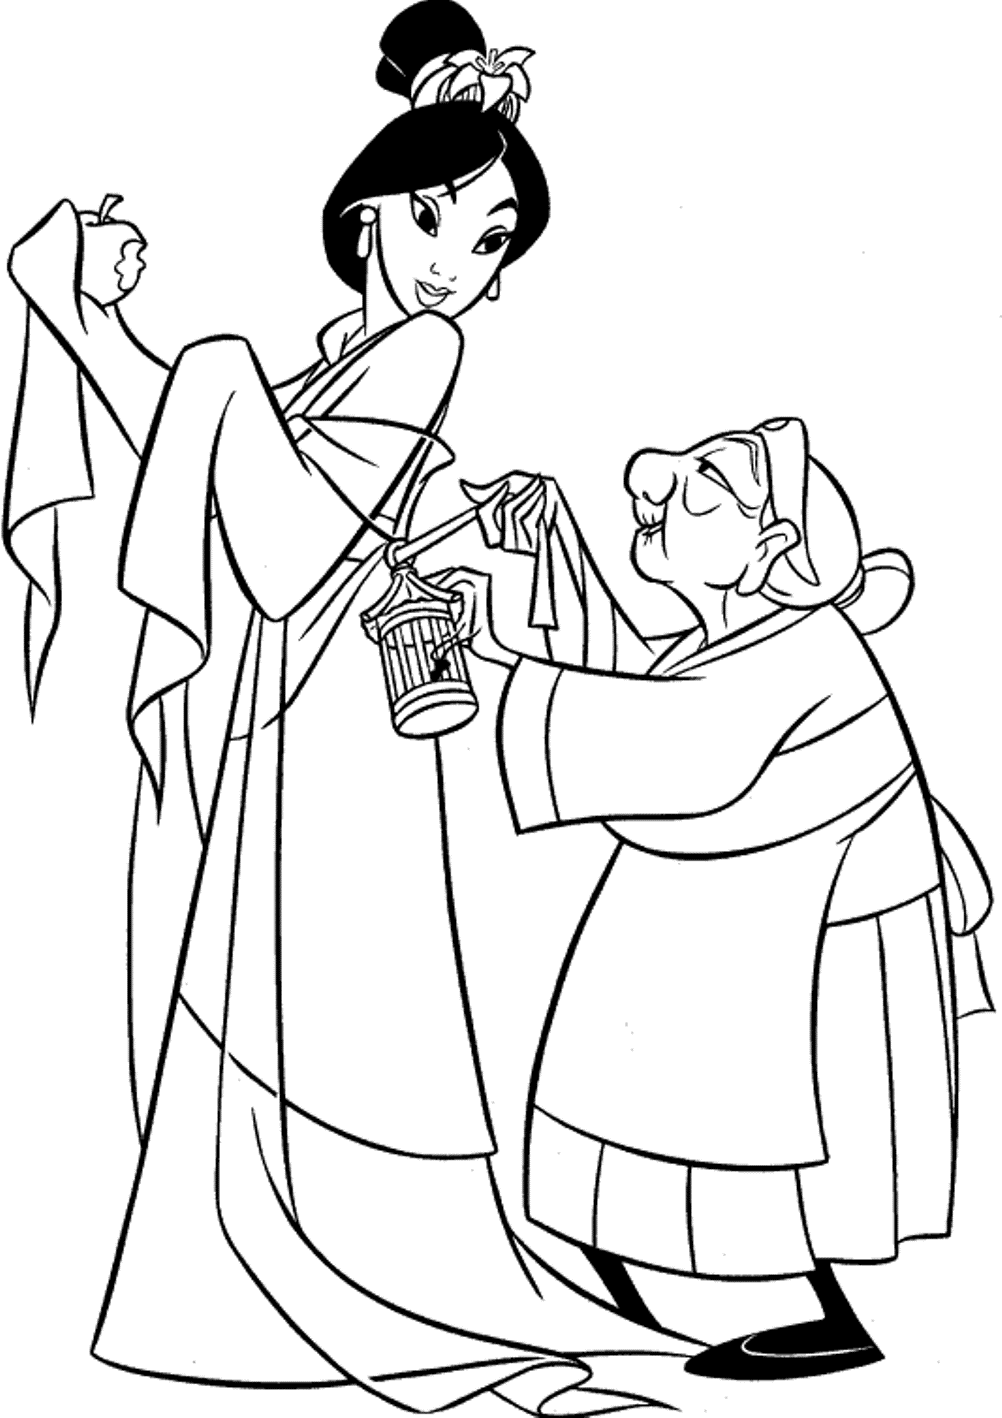 Mulan Coloring Pages Free | Cartoon Coloring pages of ...